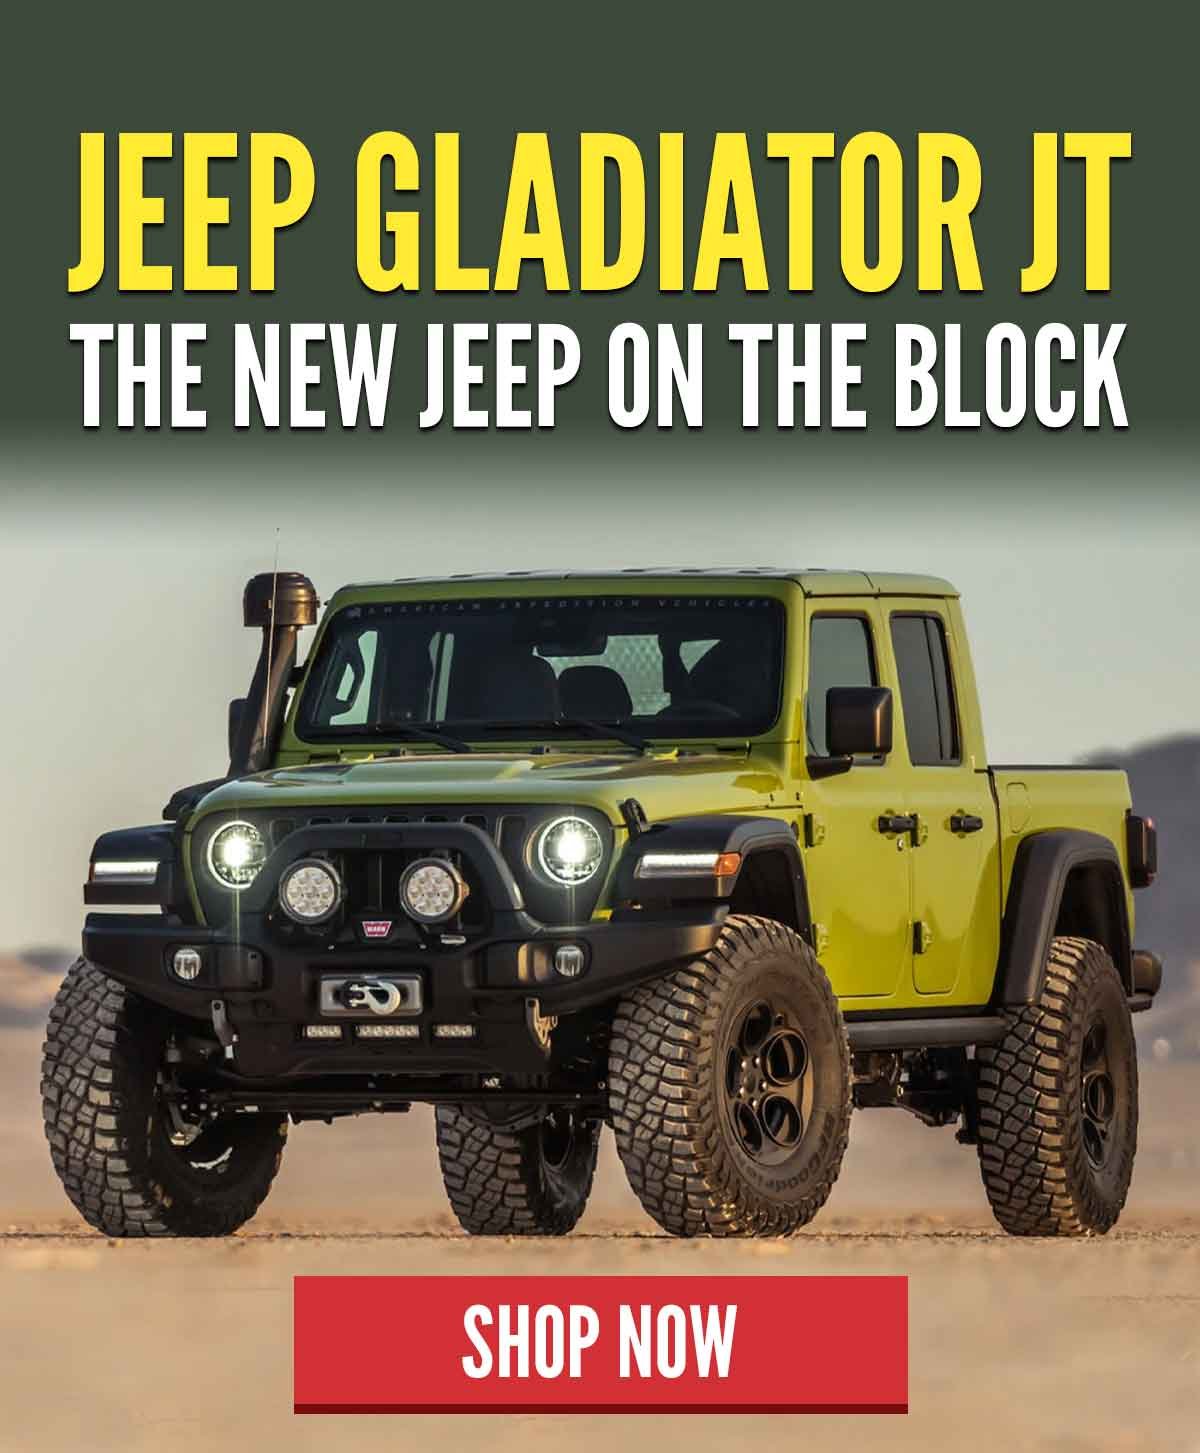 Jeep Gladiator JT - The New Jeep On The Block 